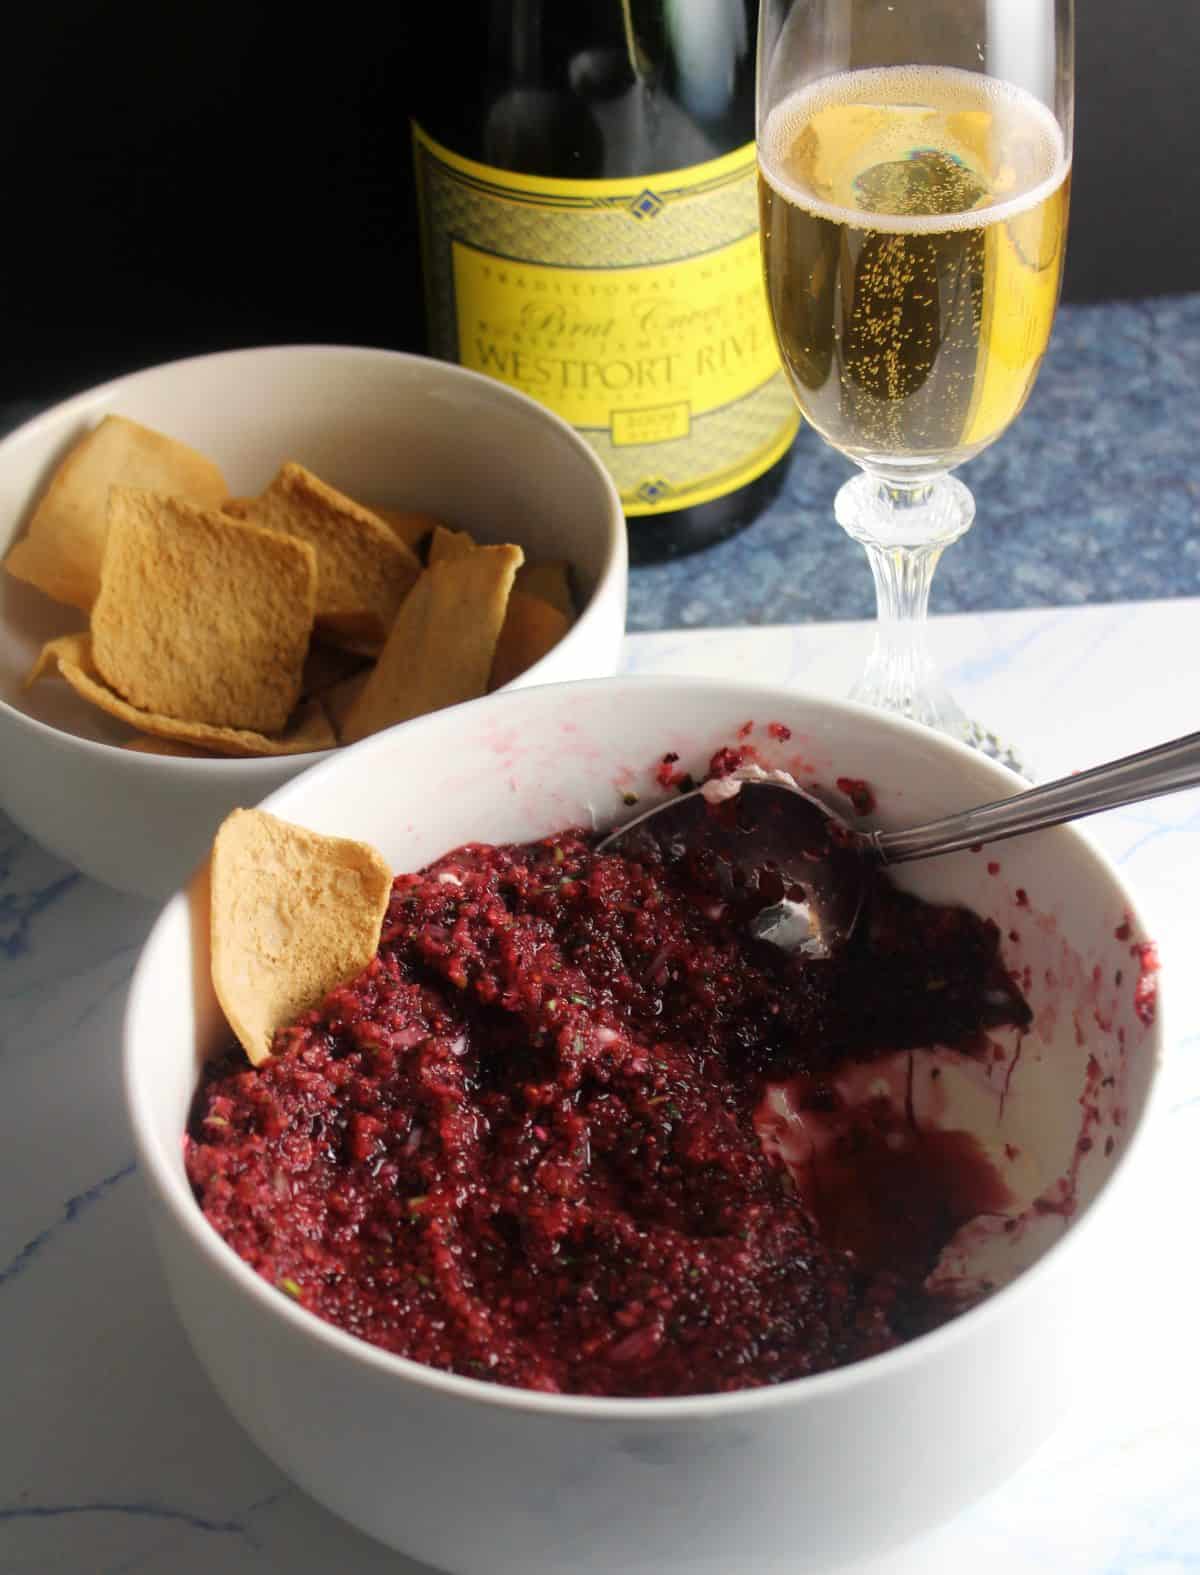 bowl of cranberry jalapeño dip paired with Westport Rivers sparkling wine.